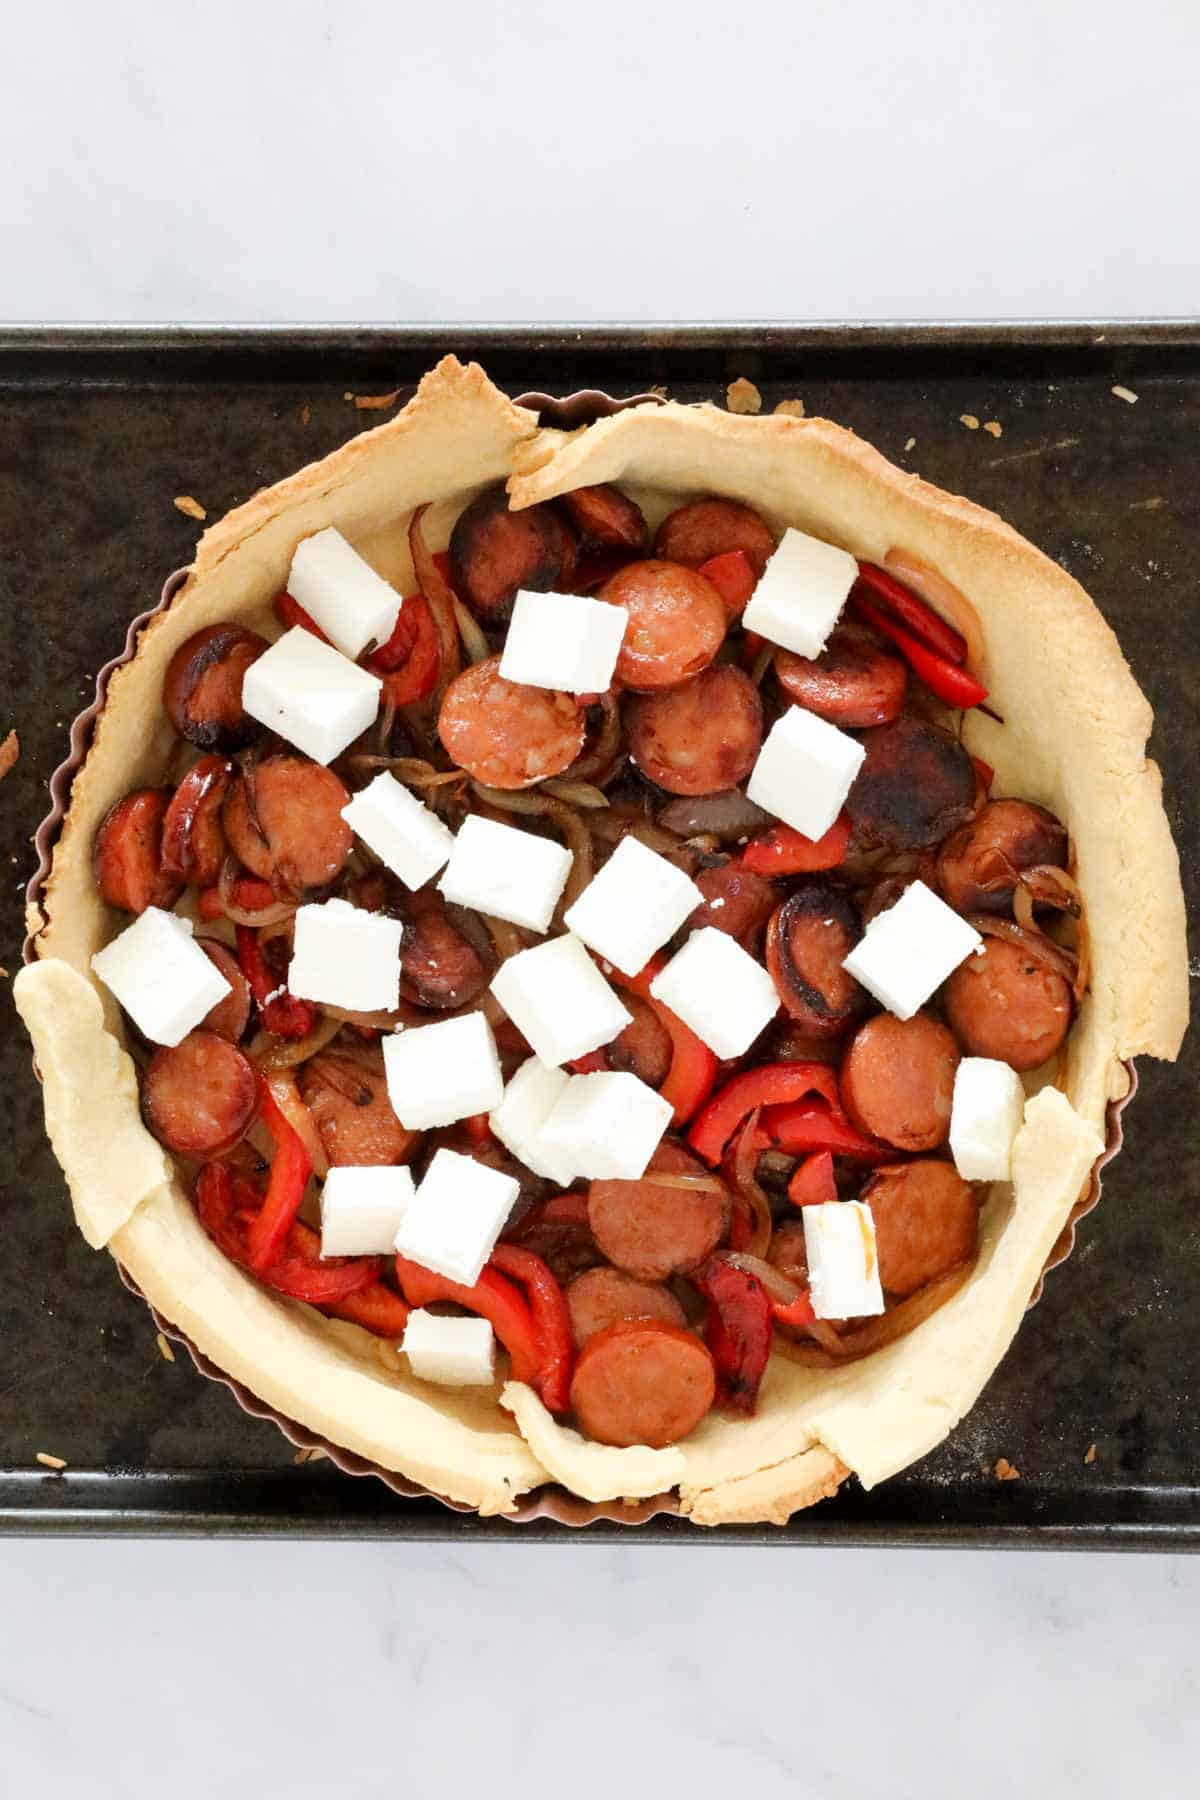 The cooked chorizo and vegetables placed in the pastry shell, topped with cubes of feta cheese.